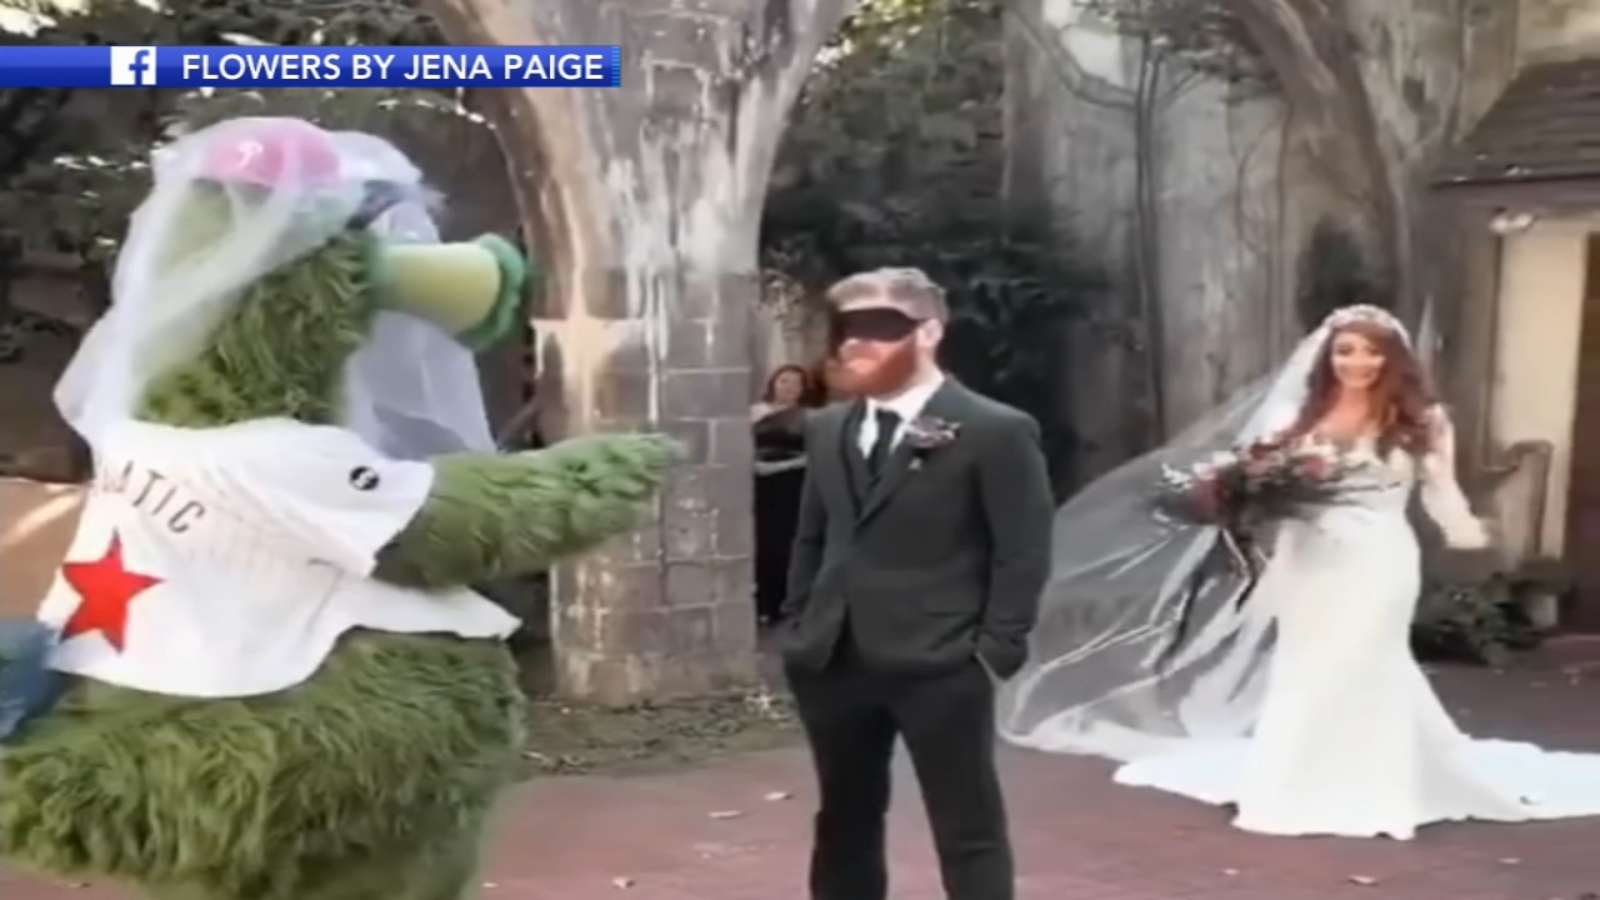   
																Hilarious video shows Phillie Phanatic pranking groom during first look at bride 
															 